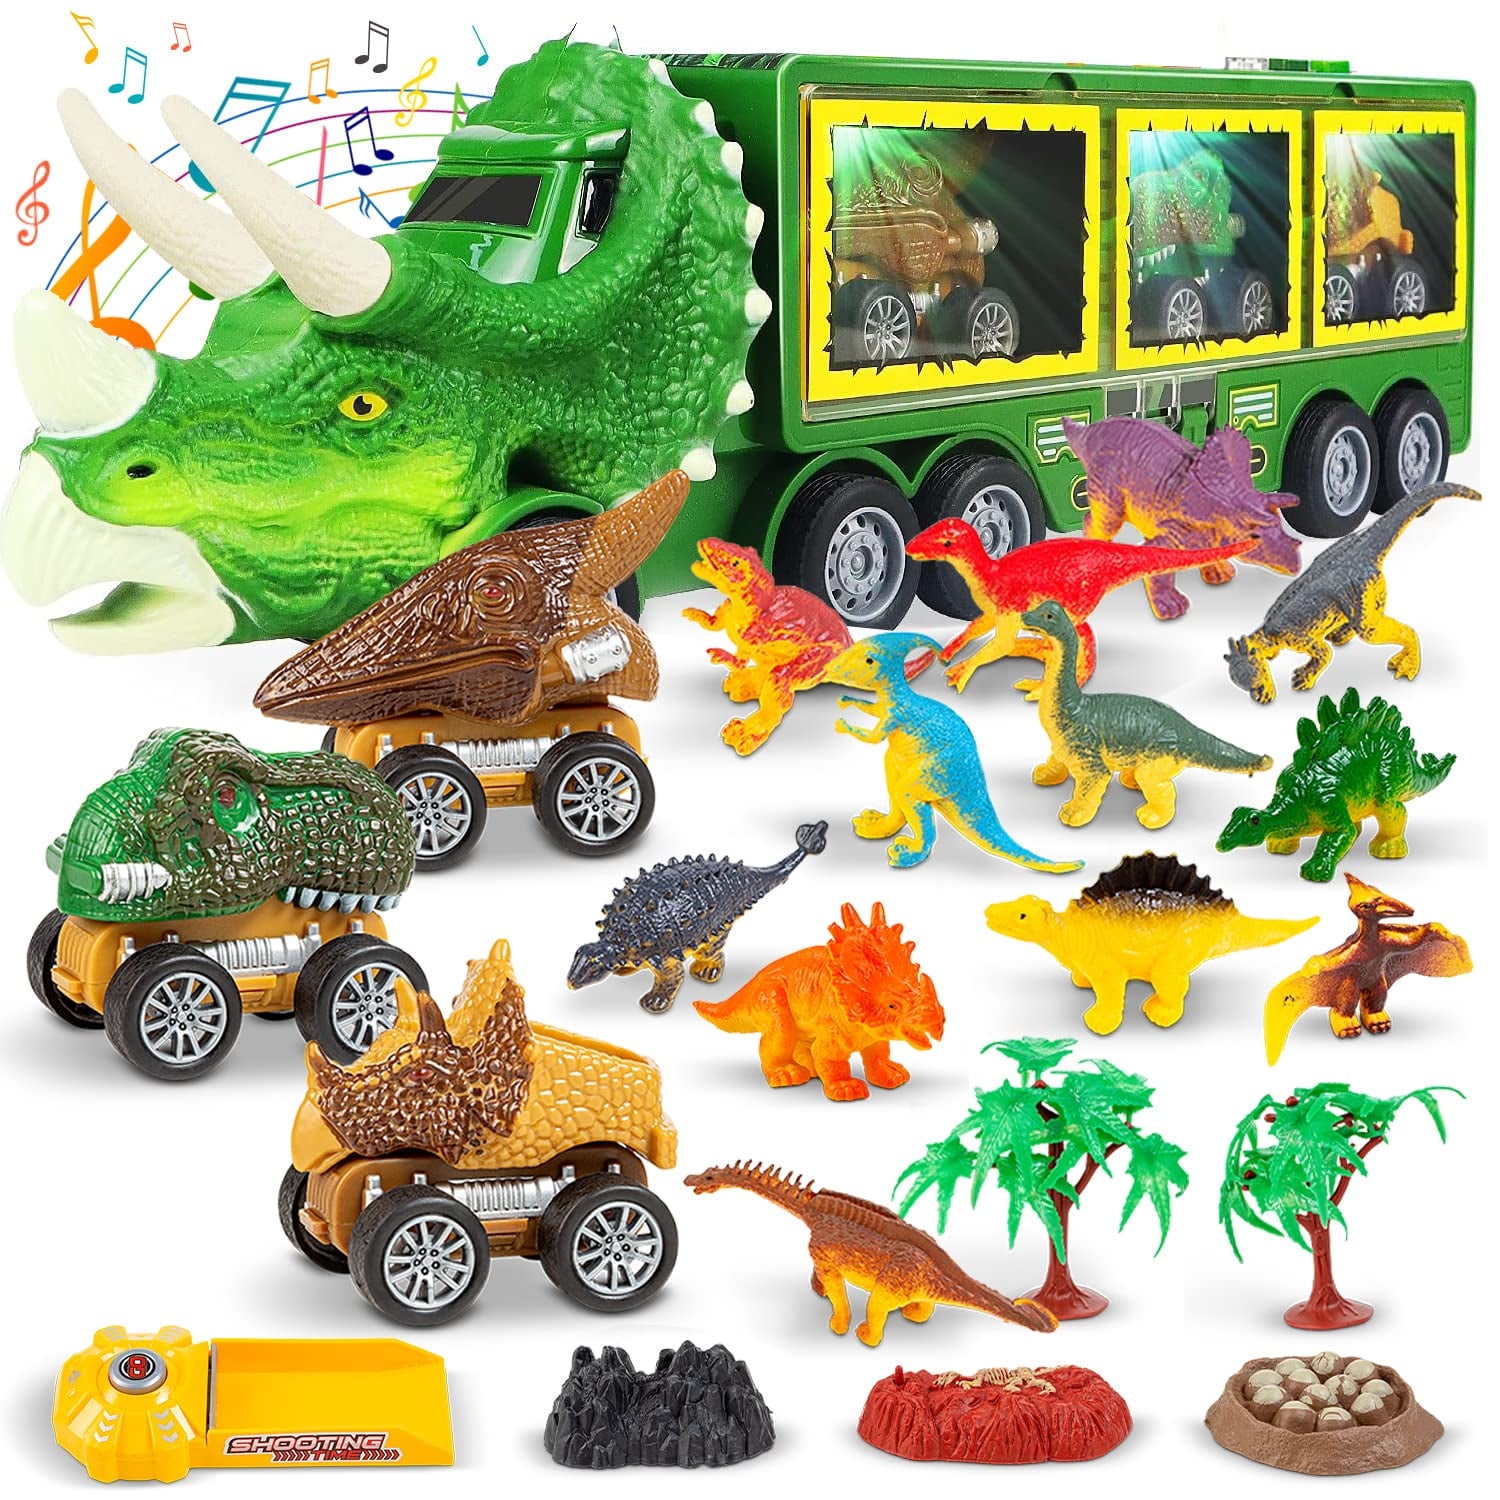 5 Best Places to Buy Dinosaur Toys for Kids  